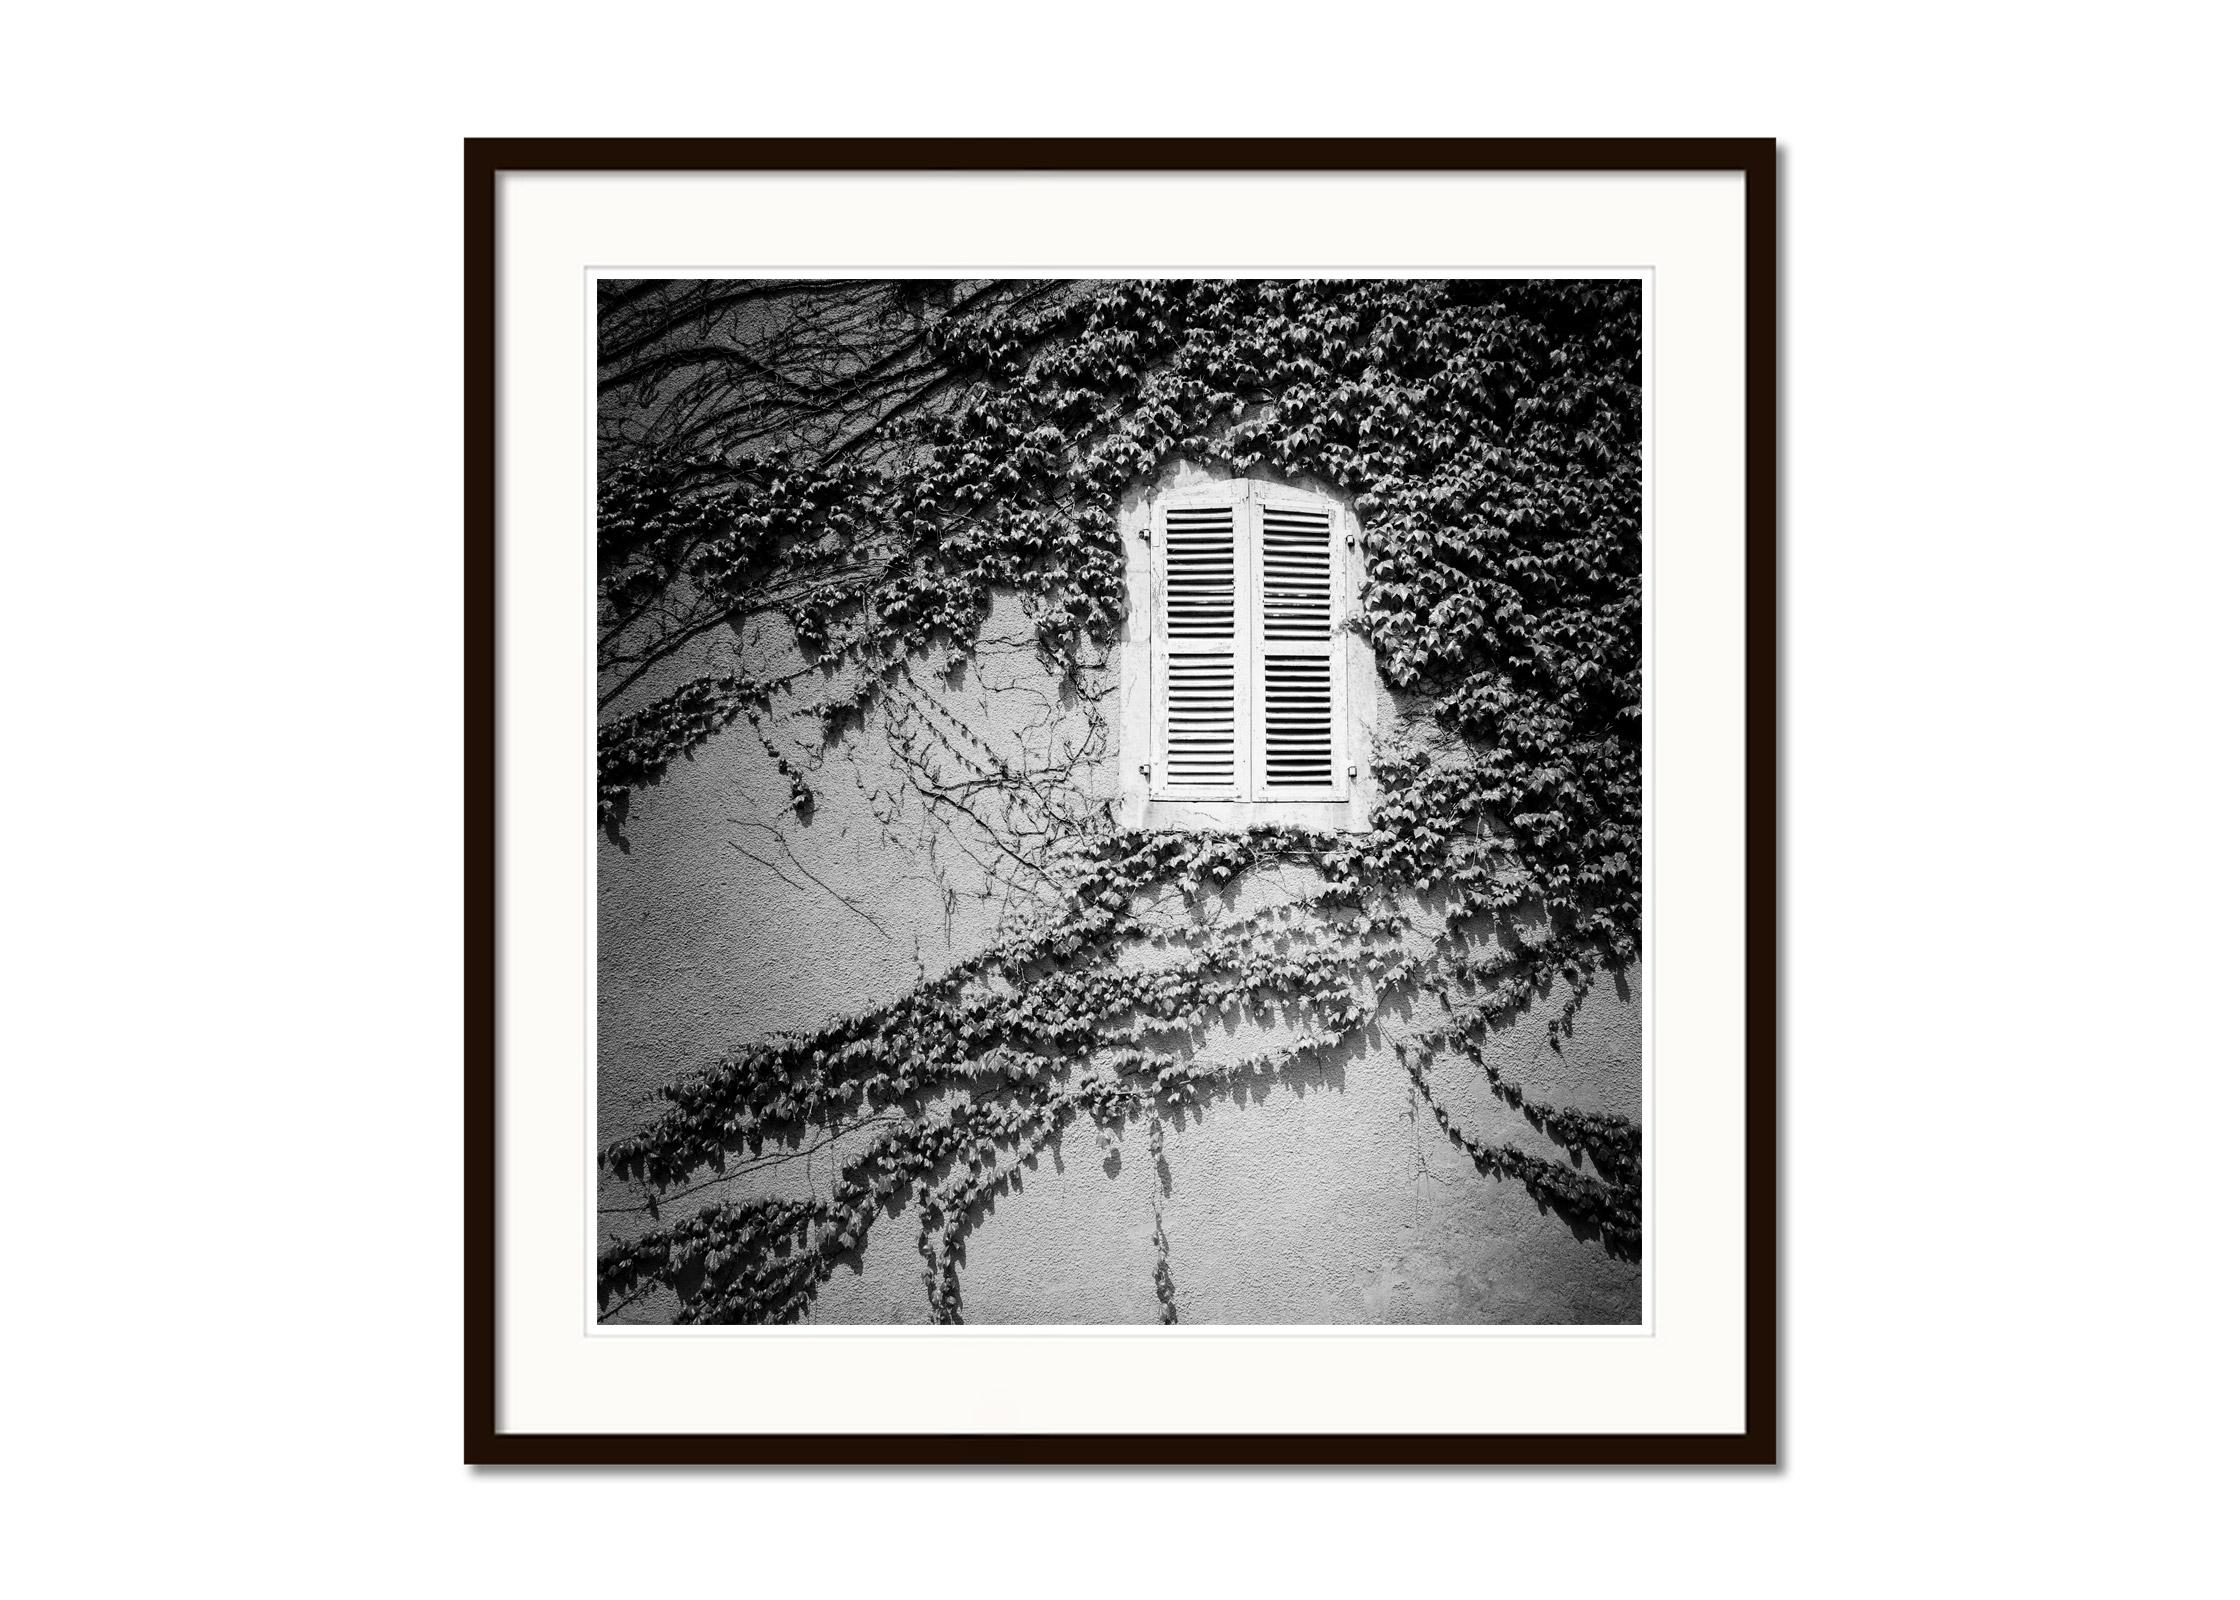 Hedera Helix, France, minimalist, black and white fine art landscape photography - Contemporary Photograph by Gerald Berghammer